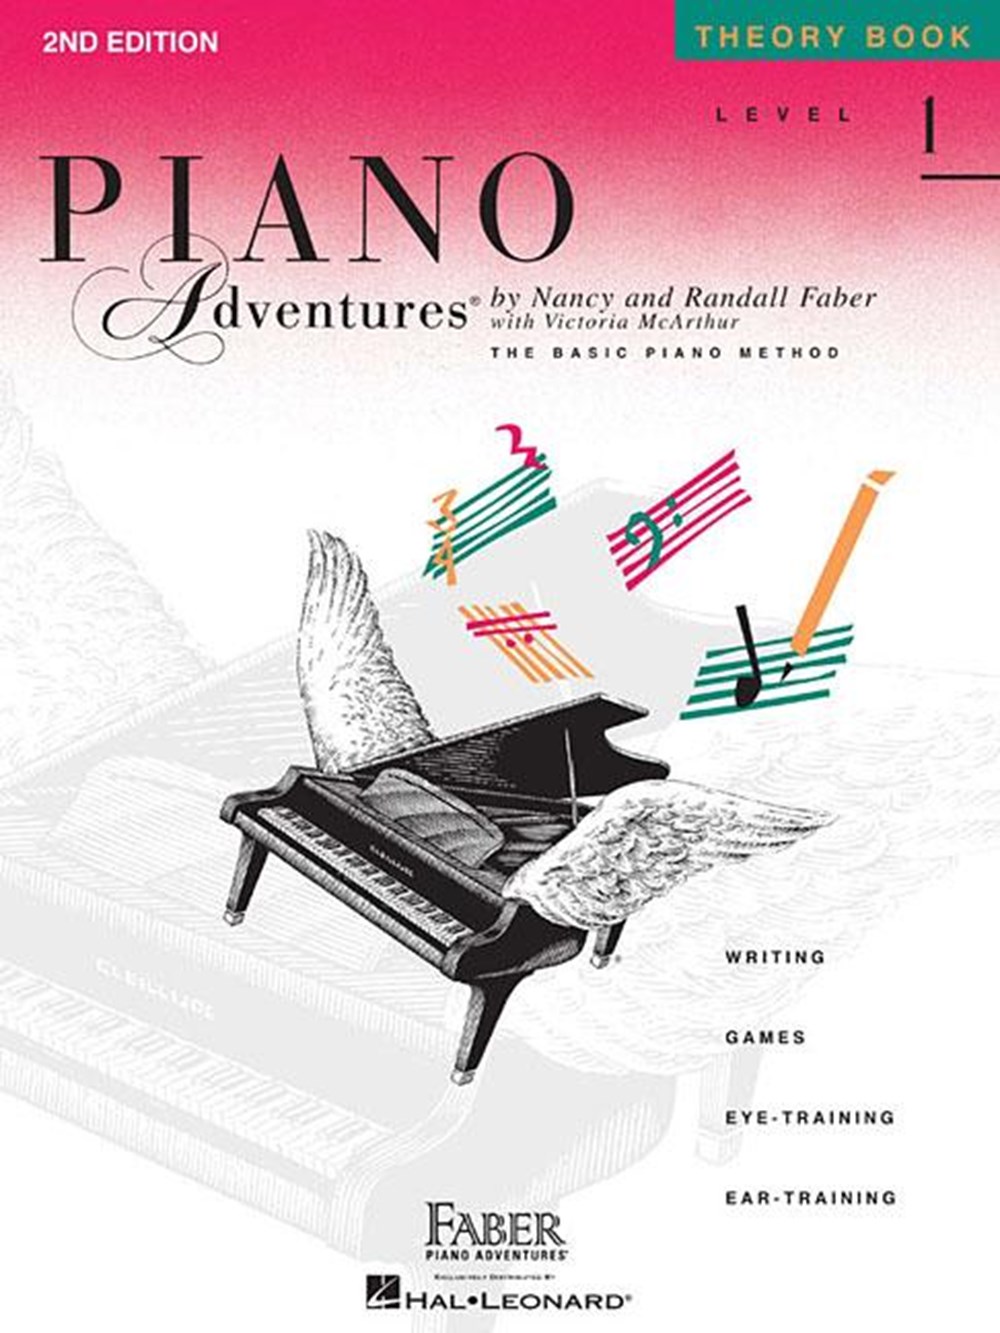 Piano Adventures - Theory Book - Level 1 (Revised)